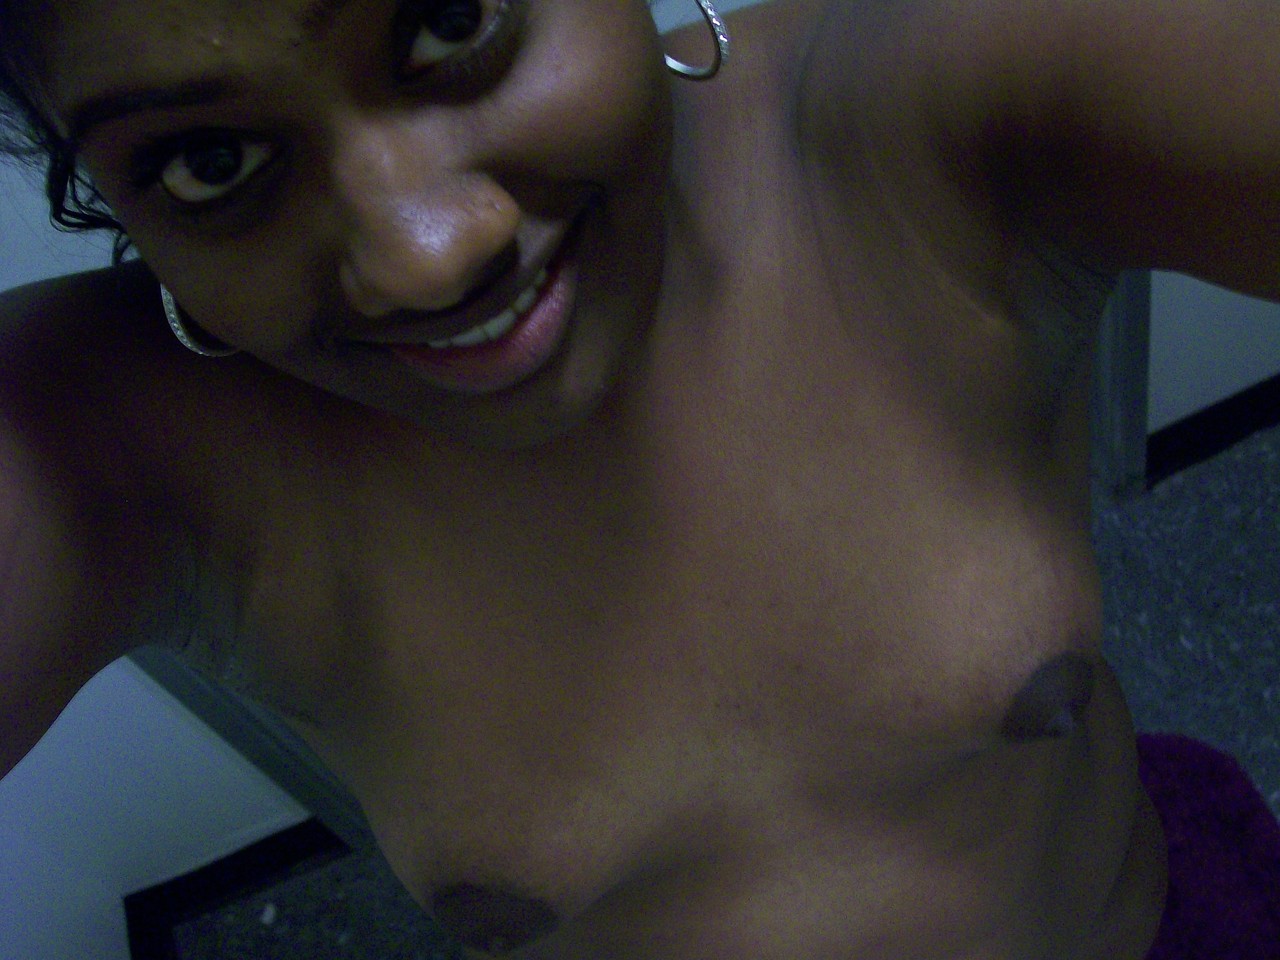 Ebony Teen Paris Takes Selfies While Showing Her Big Ass Puffy Nipples